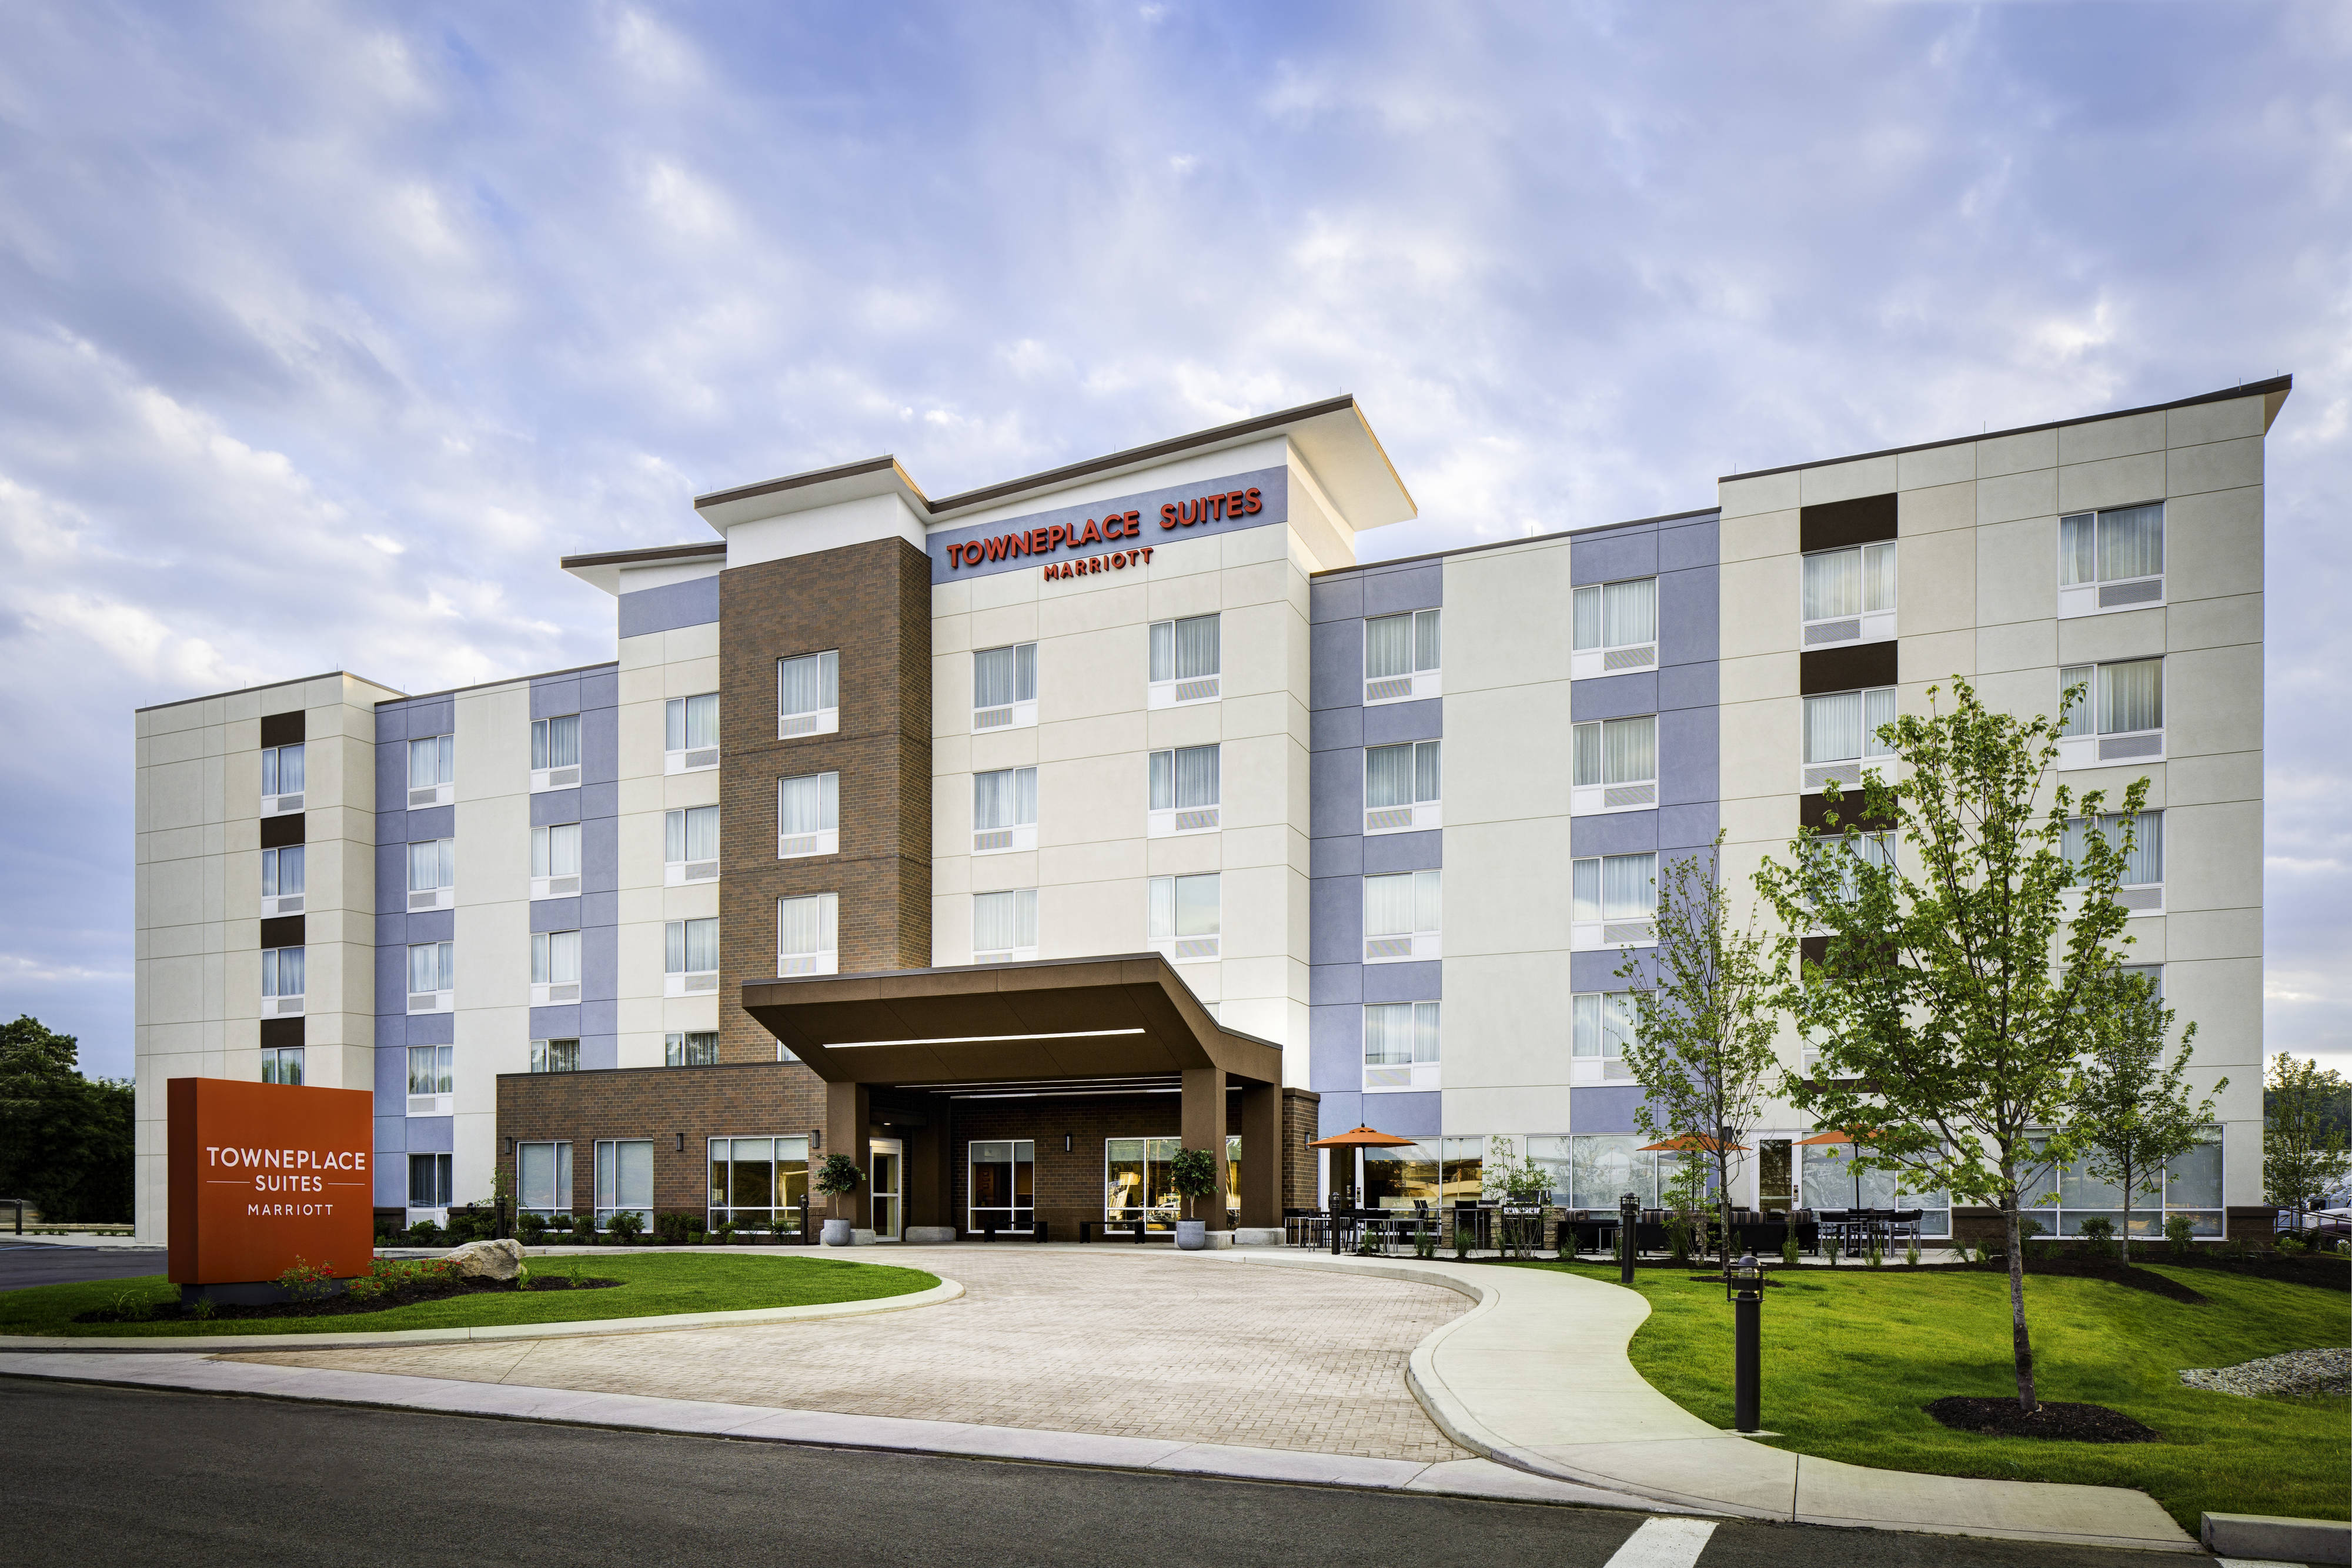 Photo of TownePlace Suites by Marriott Cedar Rapids Marion, Marion, IA